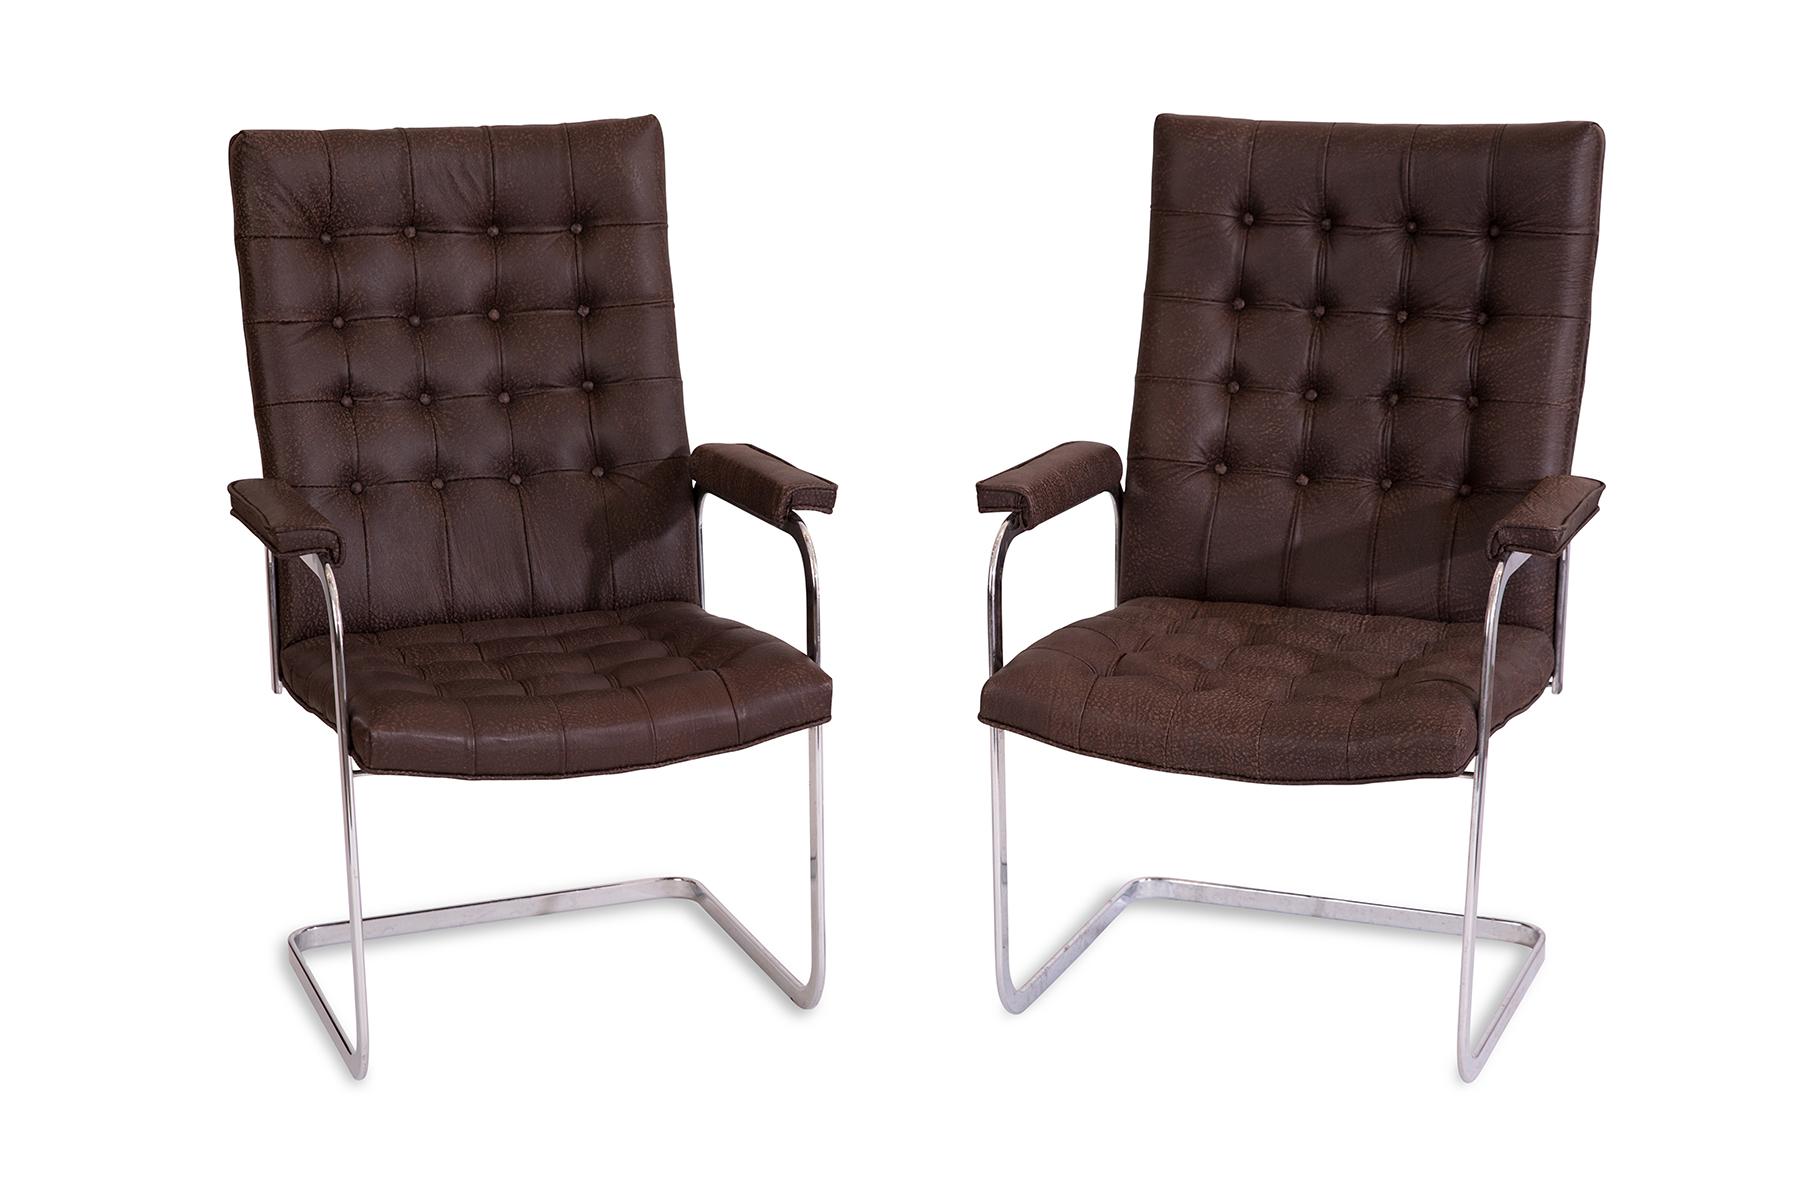 Set of 8 leather and mirror polished steel dining chairs by Stendig circa early 1970s. These examples have been newly upholstered in a pebbled chocolate brown leather. Price listed is for the set of 8.